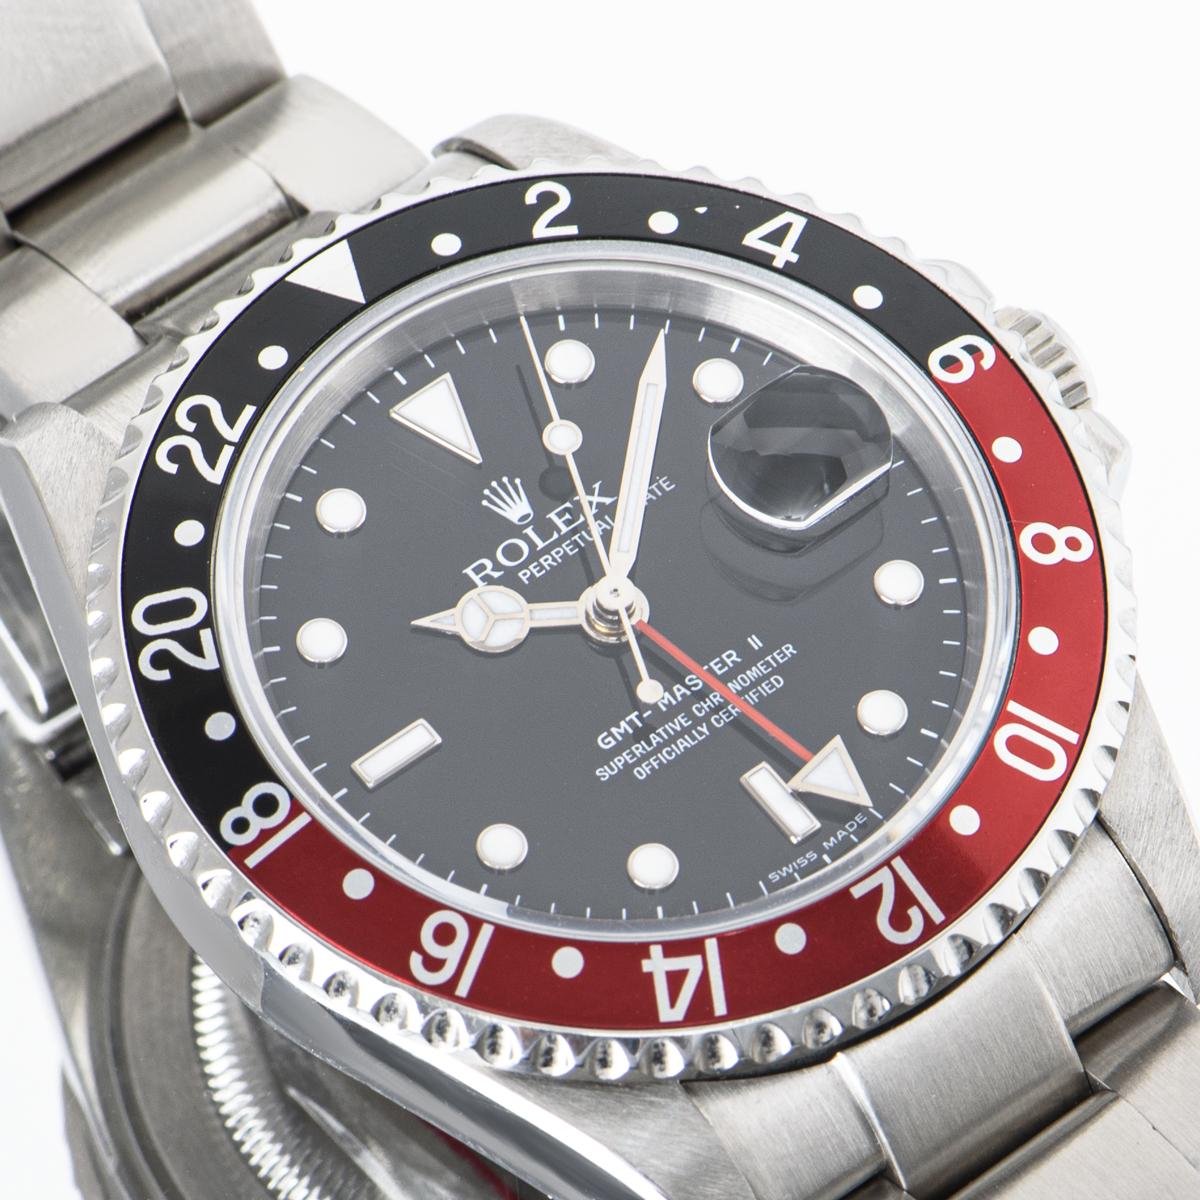 A stainless steel 40mm GMT-Master II by Rolex, featuring a rare black stick dial with the date and a red second-time zone hand. The bidirectional rotatable bezel features a 24-hour display and a red and black 